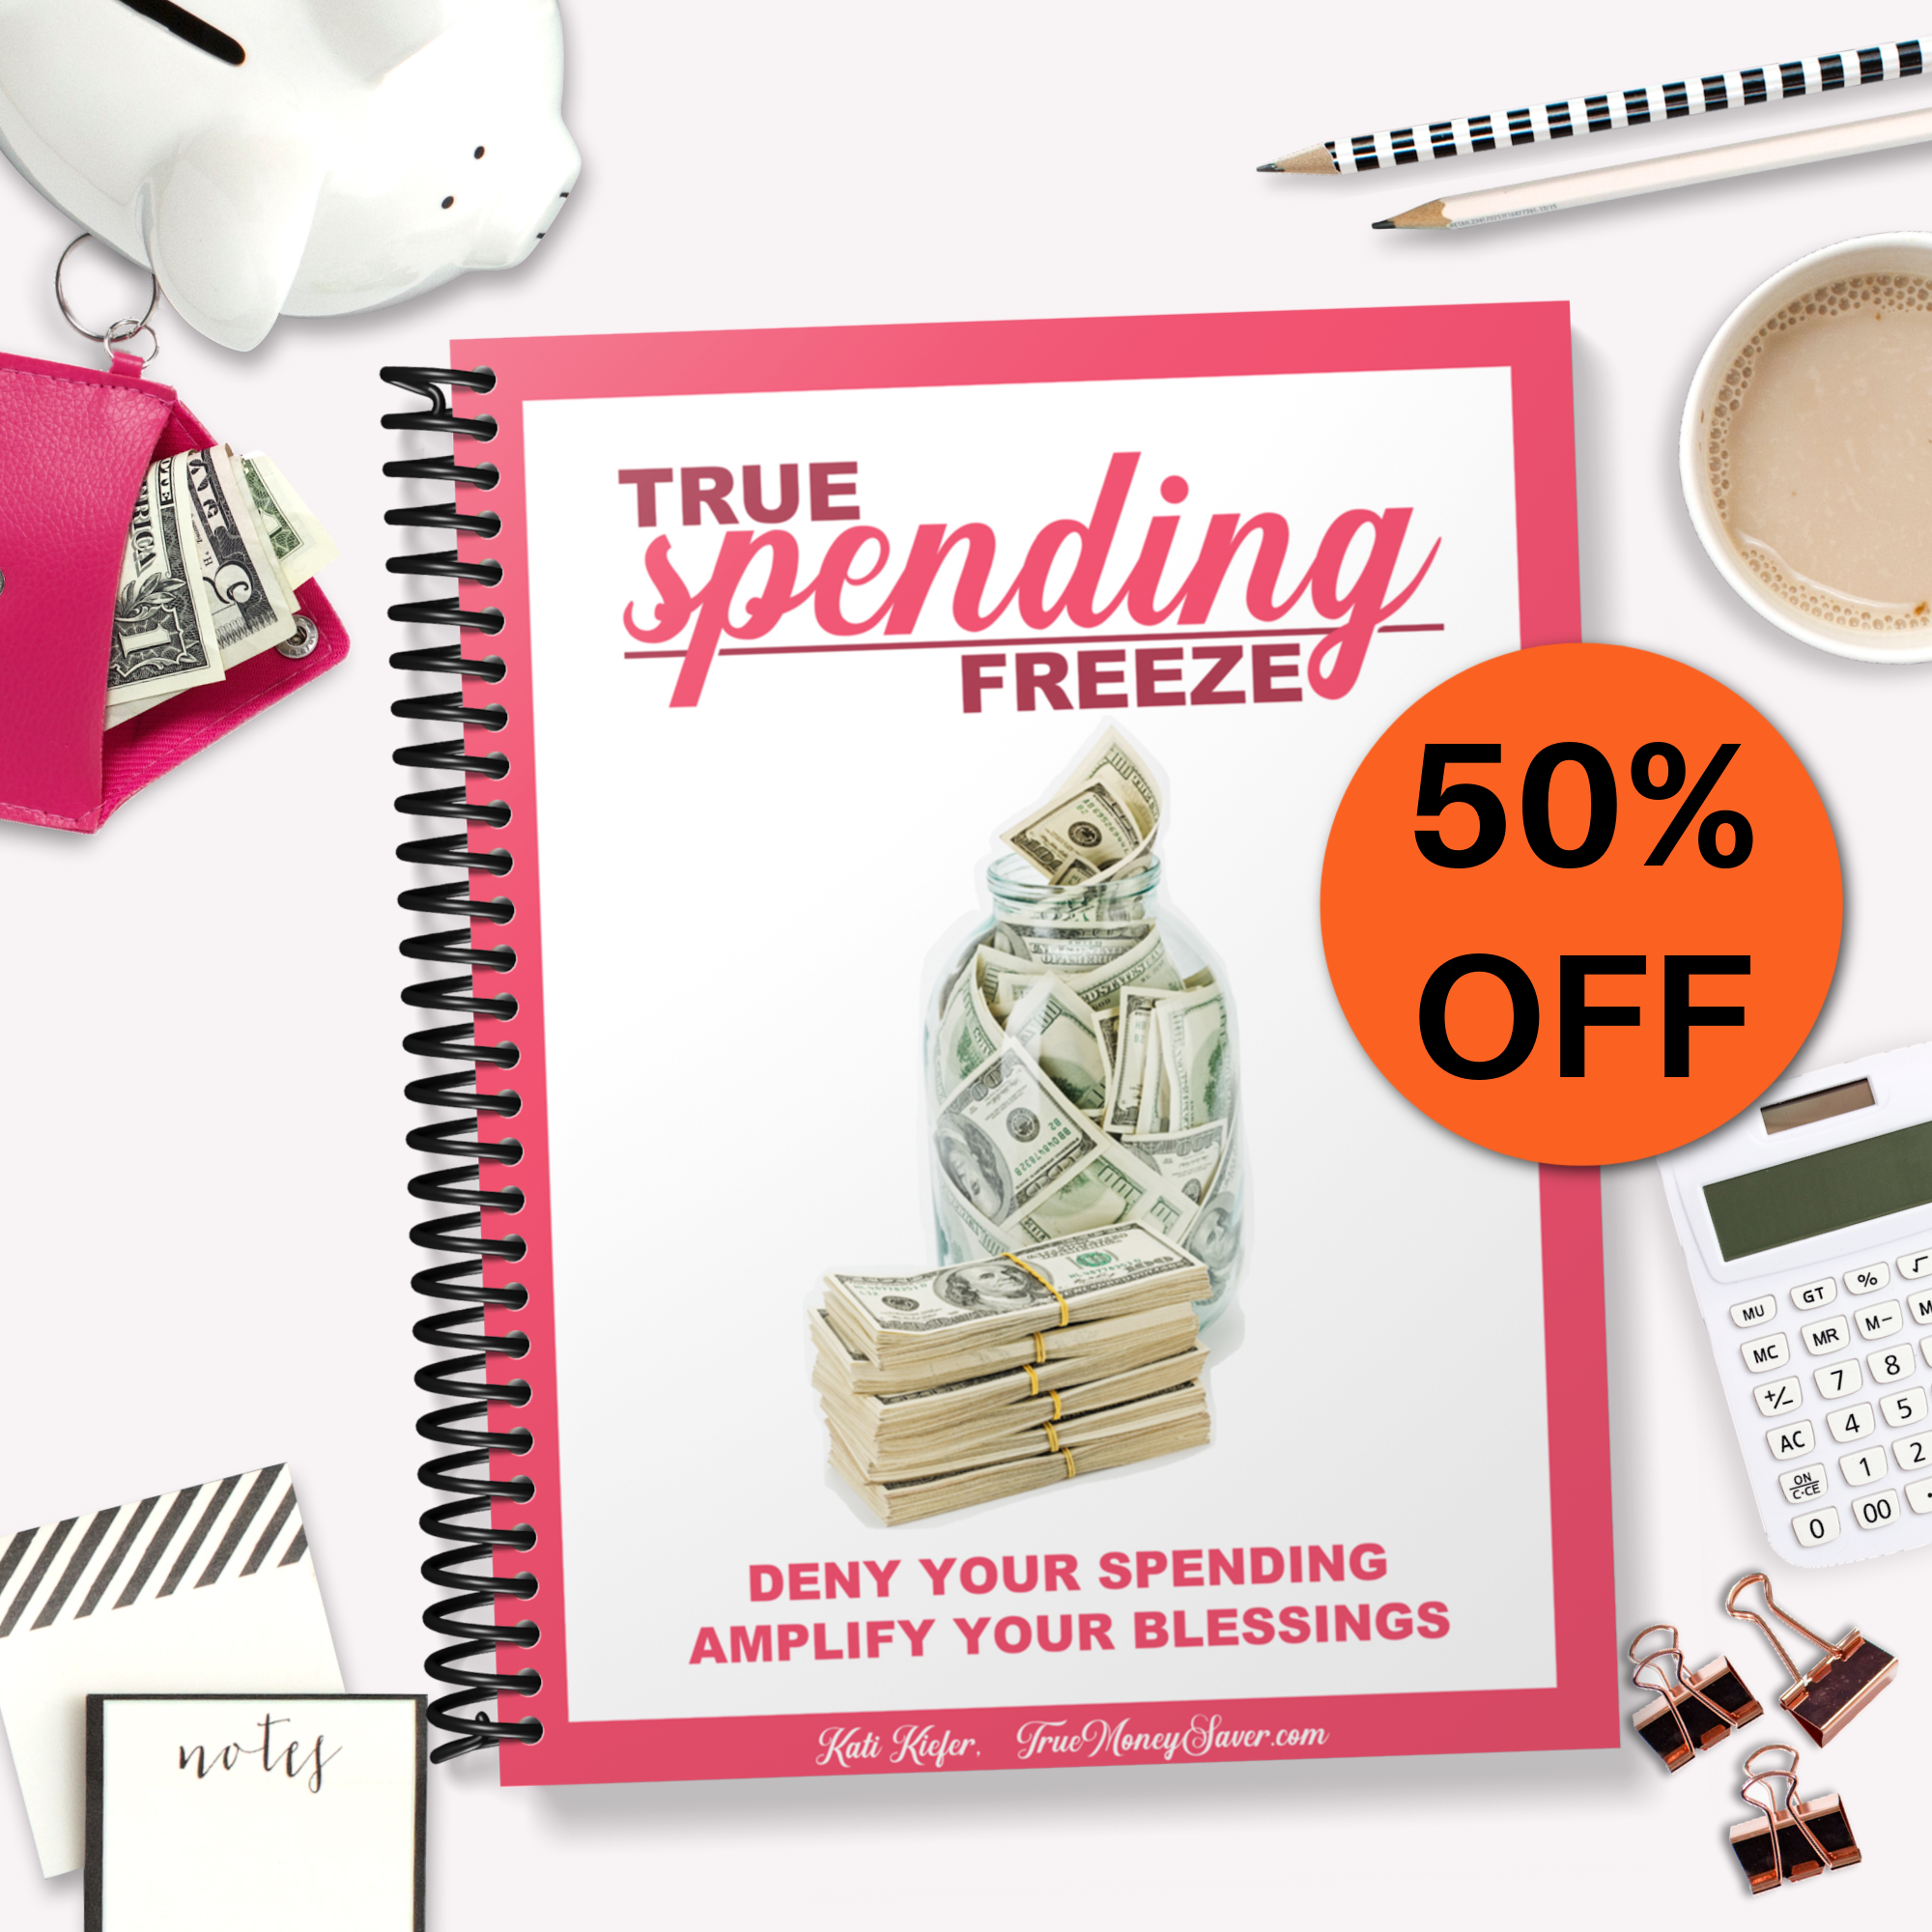 True Spending Freeze - Deny Your Spending, Amplify Your Blessings